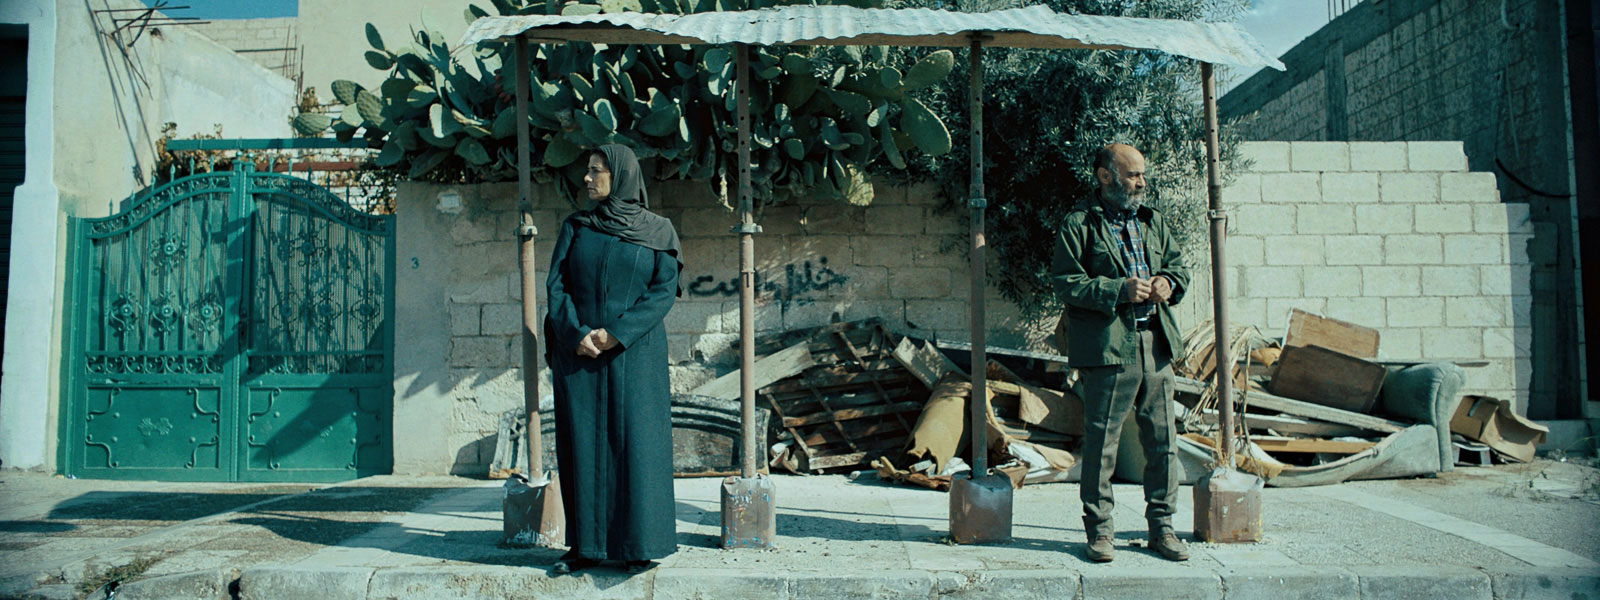 Image from 'Gaza Mon Amour'